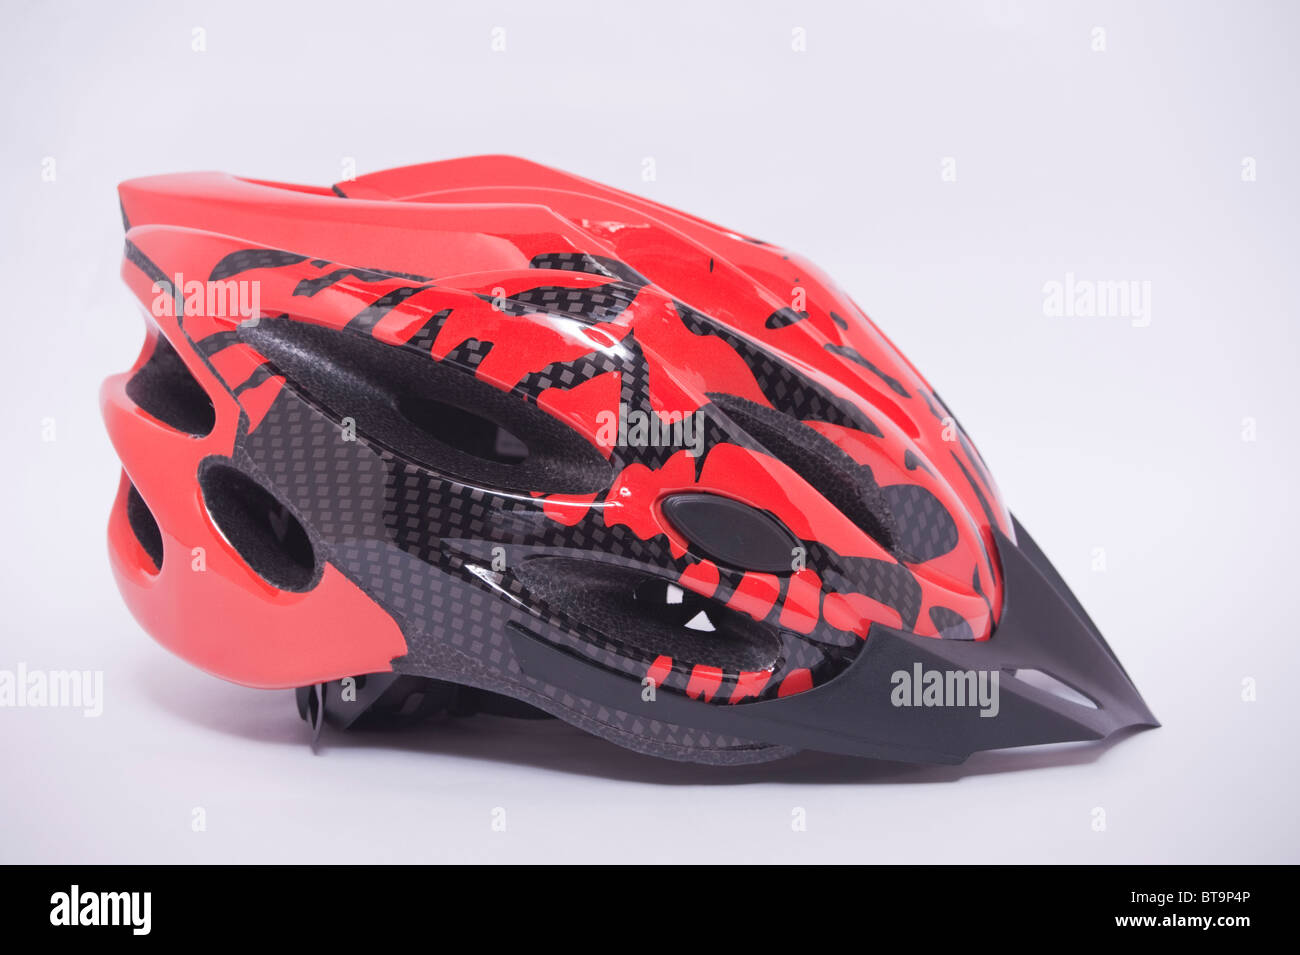 A cycle helmet against a white background Stock Photo